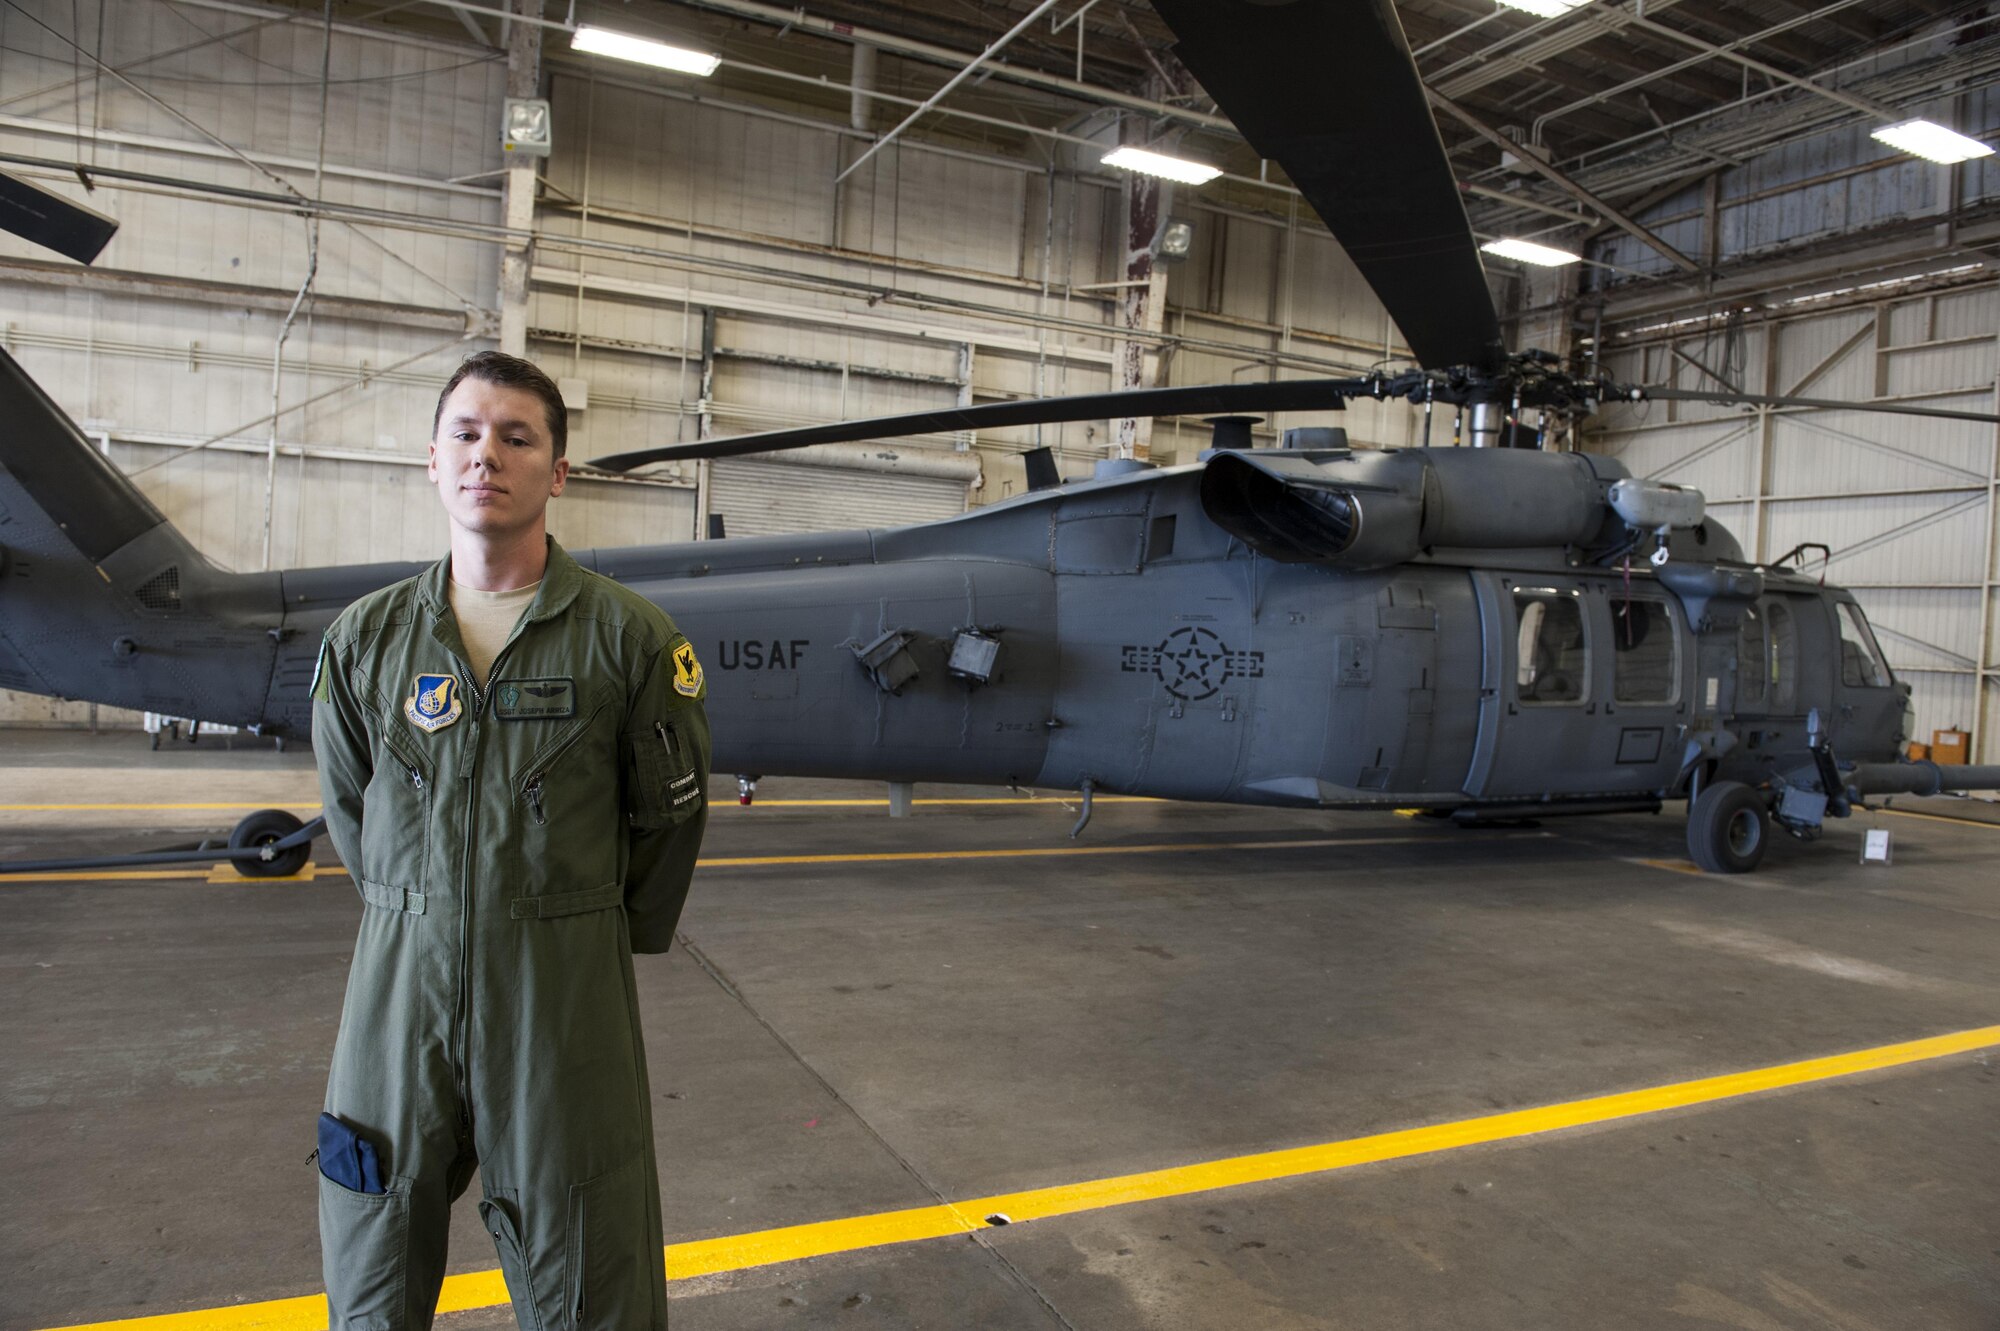 U.S. Air Force Staff Sgt. Joseph Arriza is a special mission aviator instructor for the 33rd Rescue Squadron. He participated in the rescue of five Marines alongside other members of the 33rd RQS, 31st RQS, Japan Air Self-Defense Force and the Japan Coast Guard Dec. 13, 2016. The Marines, assigned to Marine Aircraft Group 36, 1st Marine Aircraft Wing, had conducted a shallow water landing off the coast of Okinawa near Camp Schwab in an MV-22 Osprey. (U.S. Air Force photo by Senior Airman Lynette M. Rolen/Released)